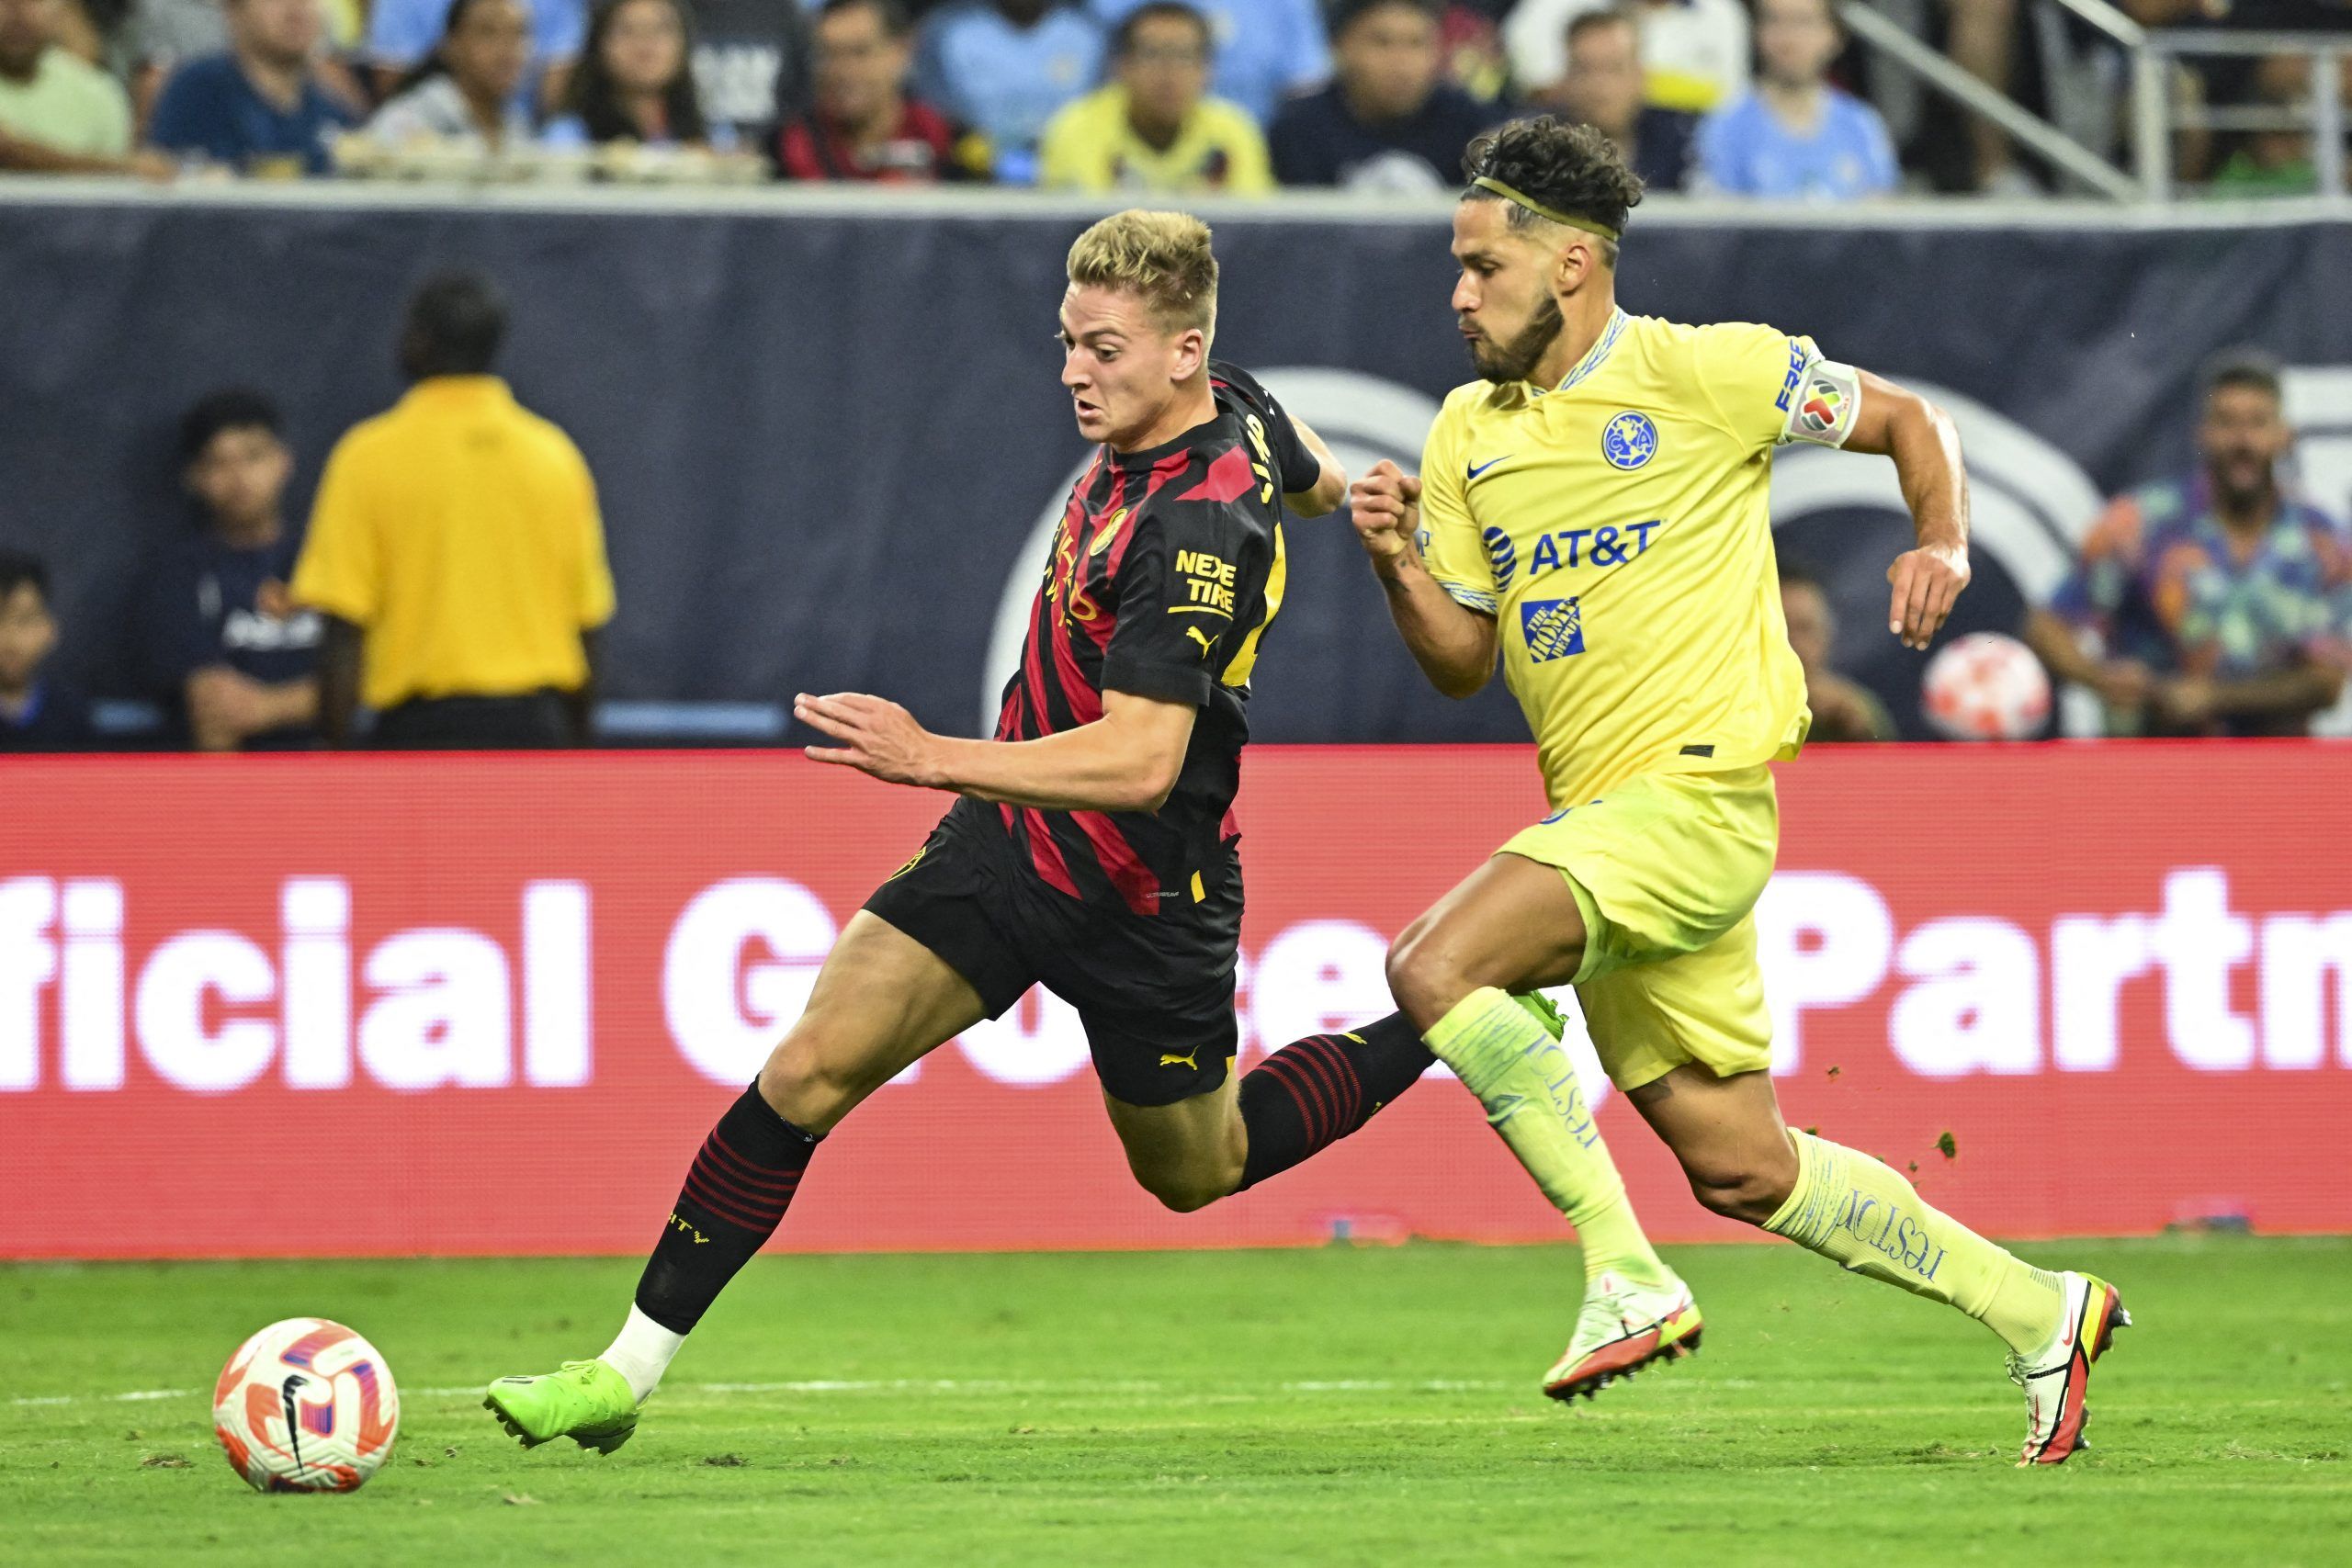 Jul 20, 2022; Houston, TX, USA; Manchester City forward Liam Delap (48) and Club America defender Bruno Valdez (18) battle for the ball during the second half at NRG Stadium. Mandatory Credit: Maria Lysaker-USA TODAY Sports